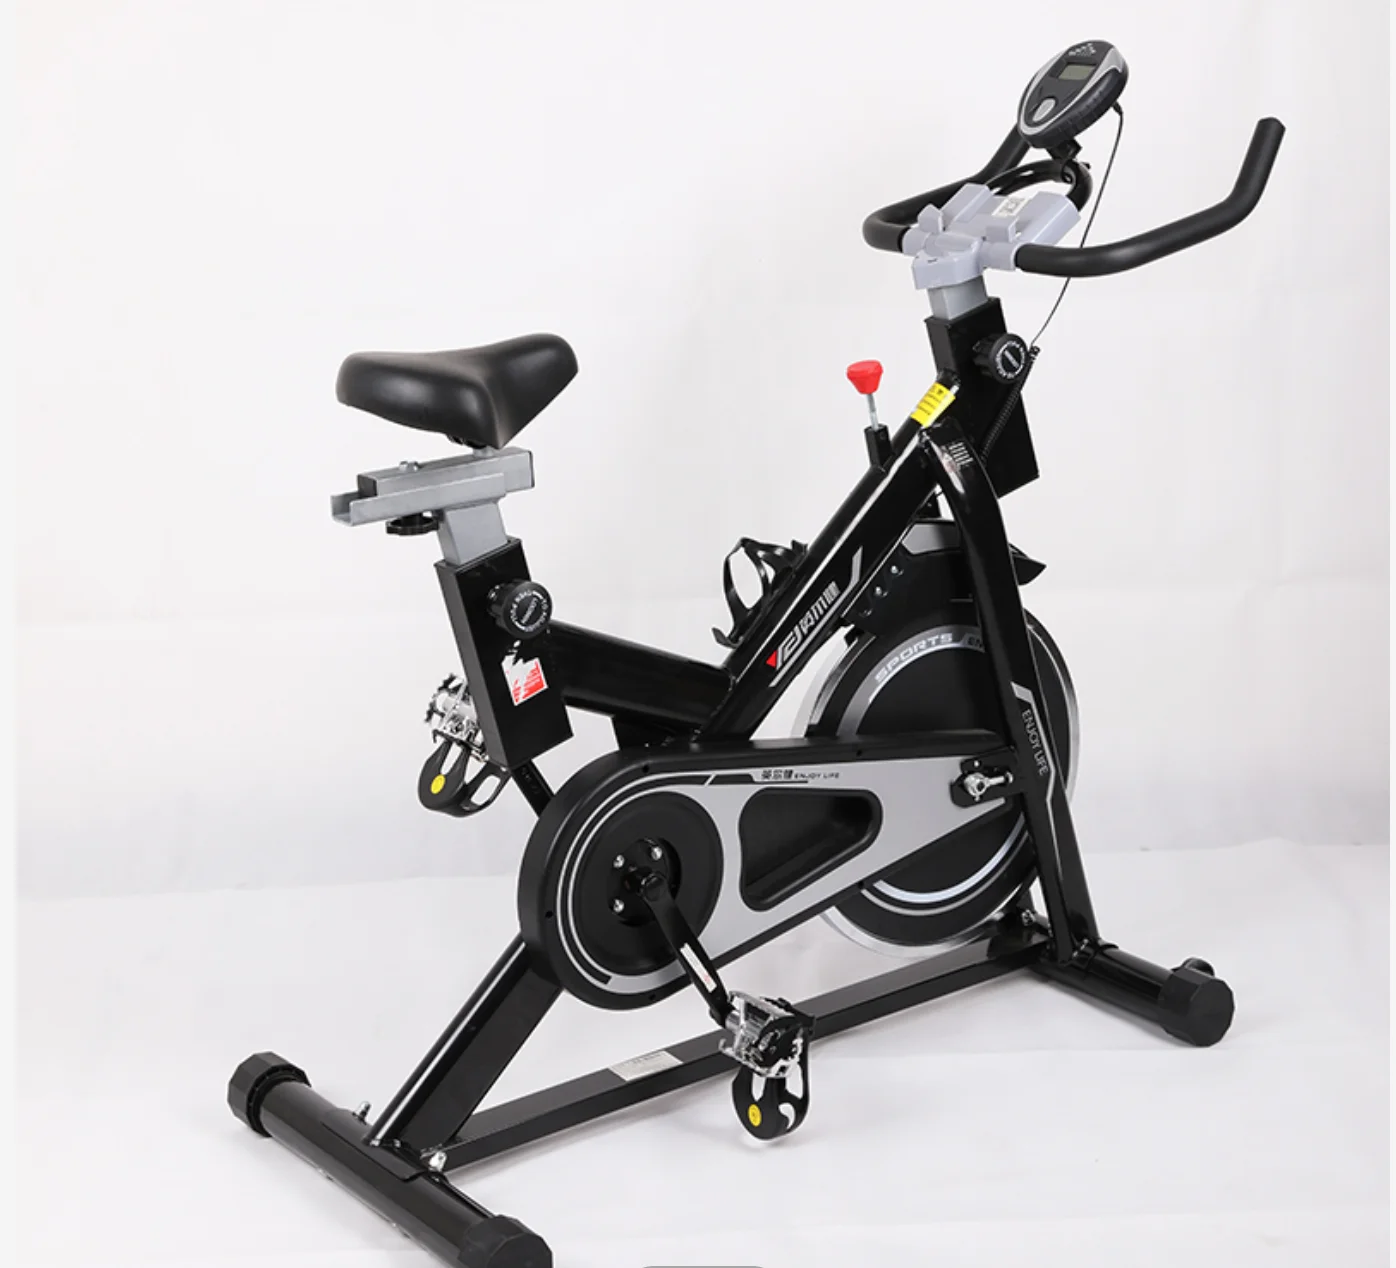 

Indoor Cycling Bike with Magnetic Resistance Exercise Bikes Stationary,Silent Belt Drive with LCD Monitor & Comfortable Seat, Black color